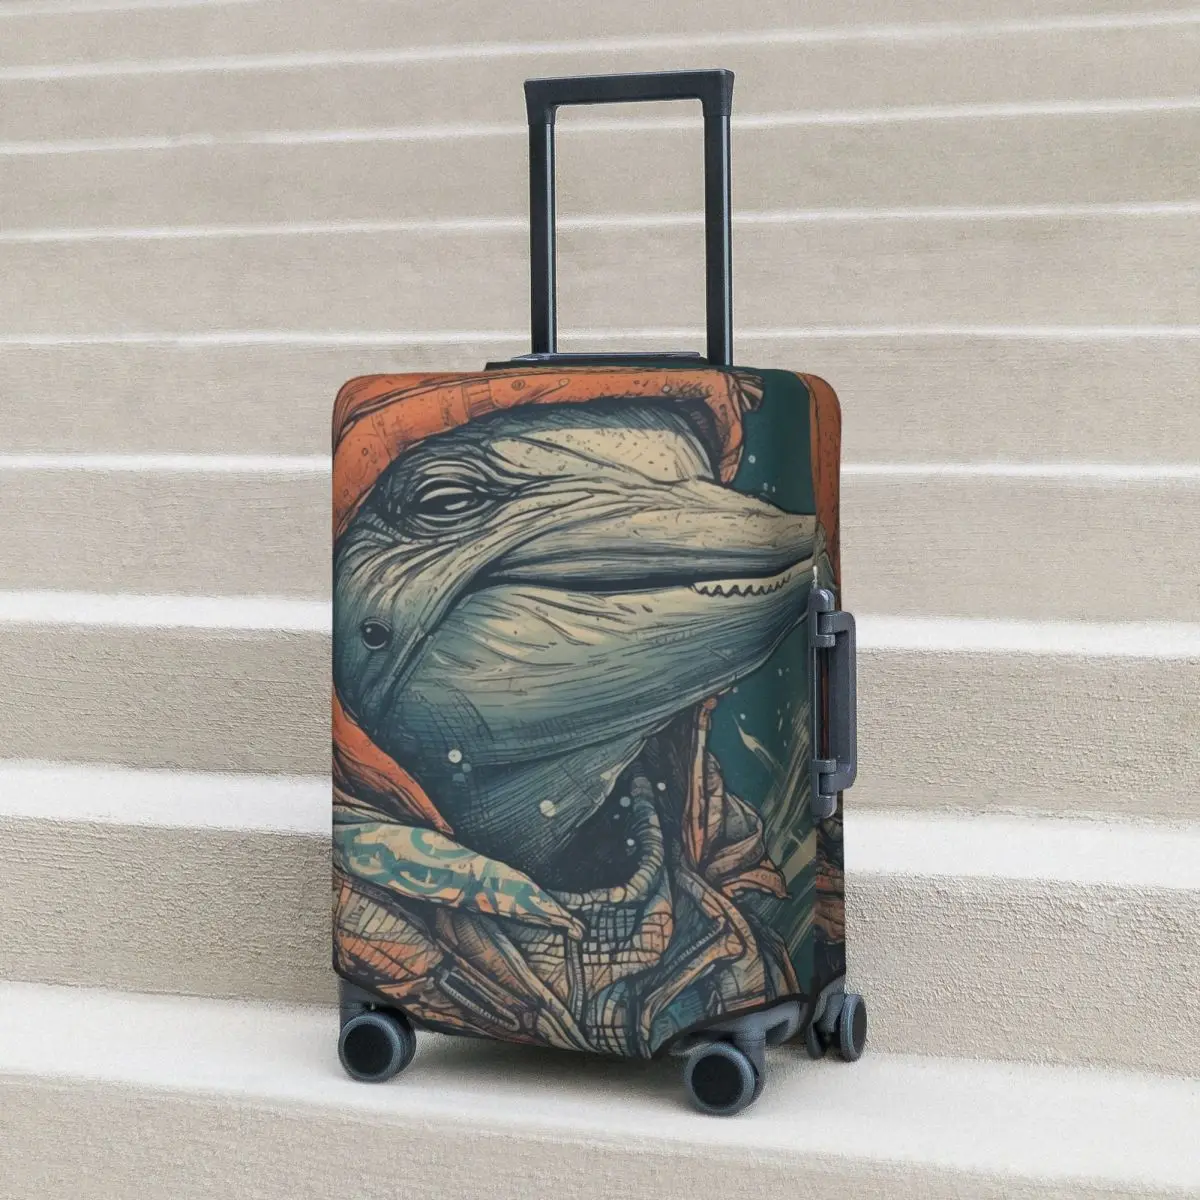 

Dolphin Suitcase Cover Vacation Pop Caricatures Illustration Fun Luggage Accesories Travel Protection